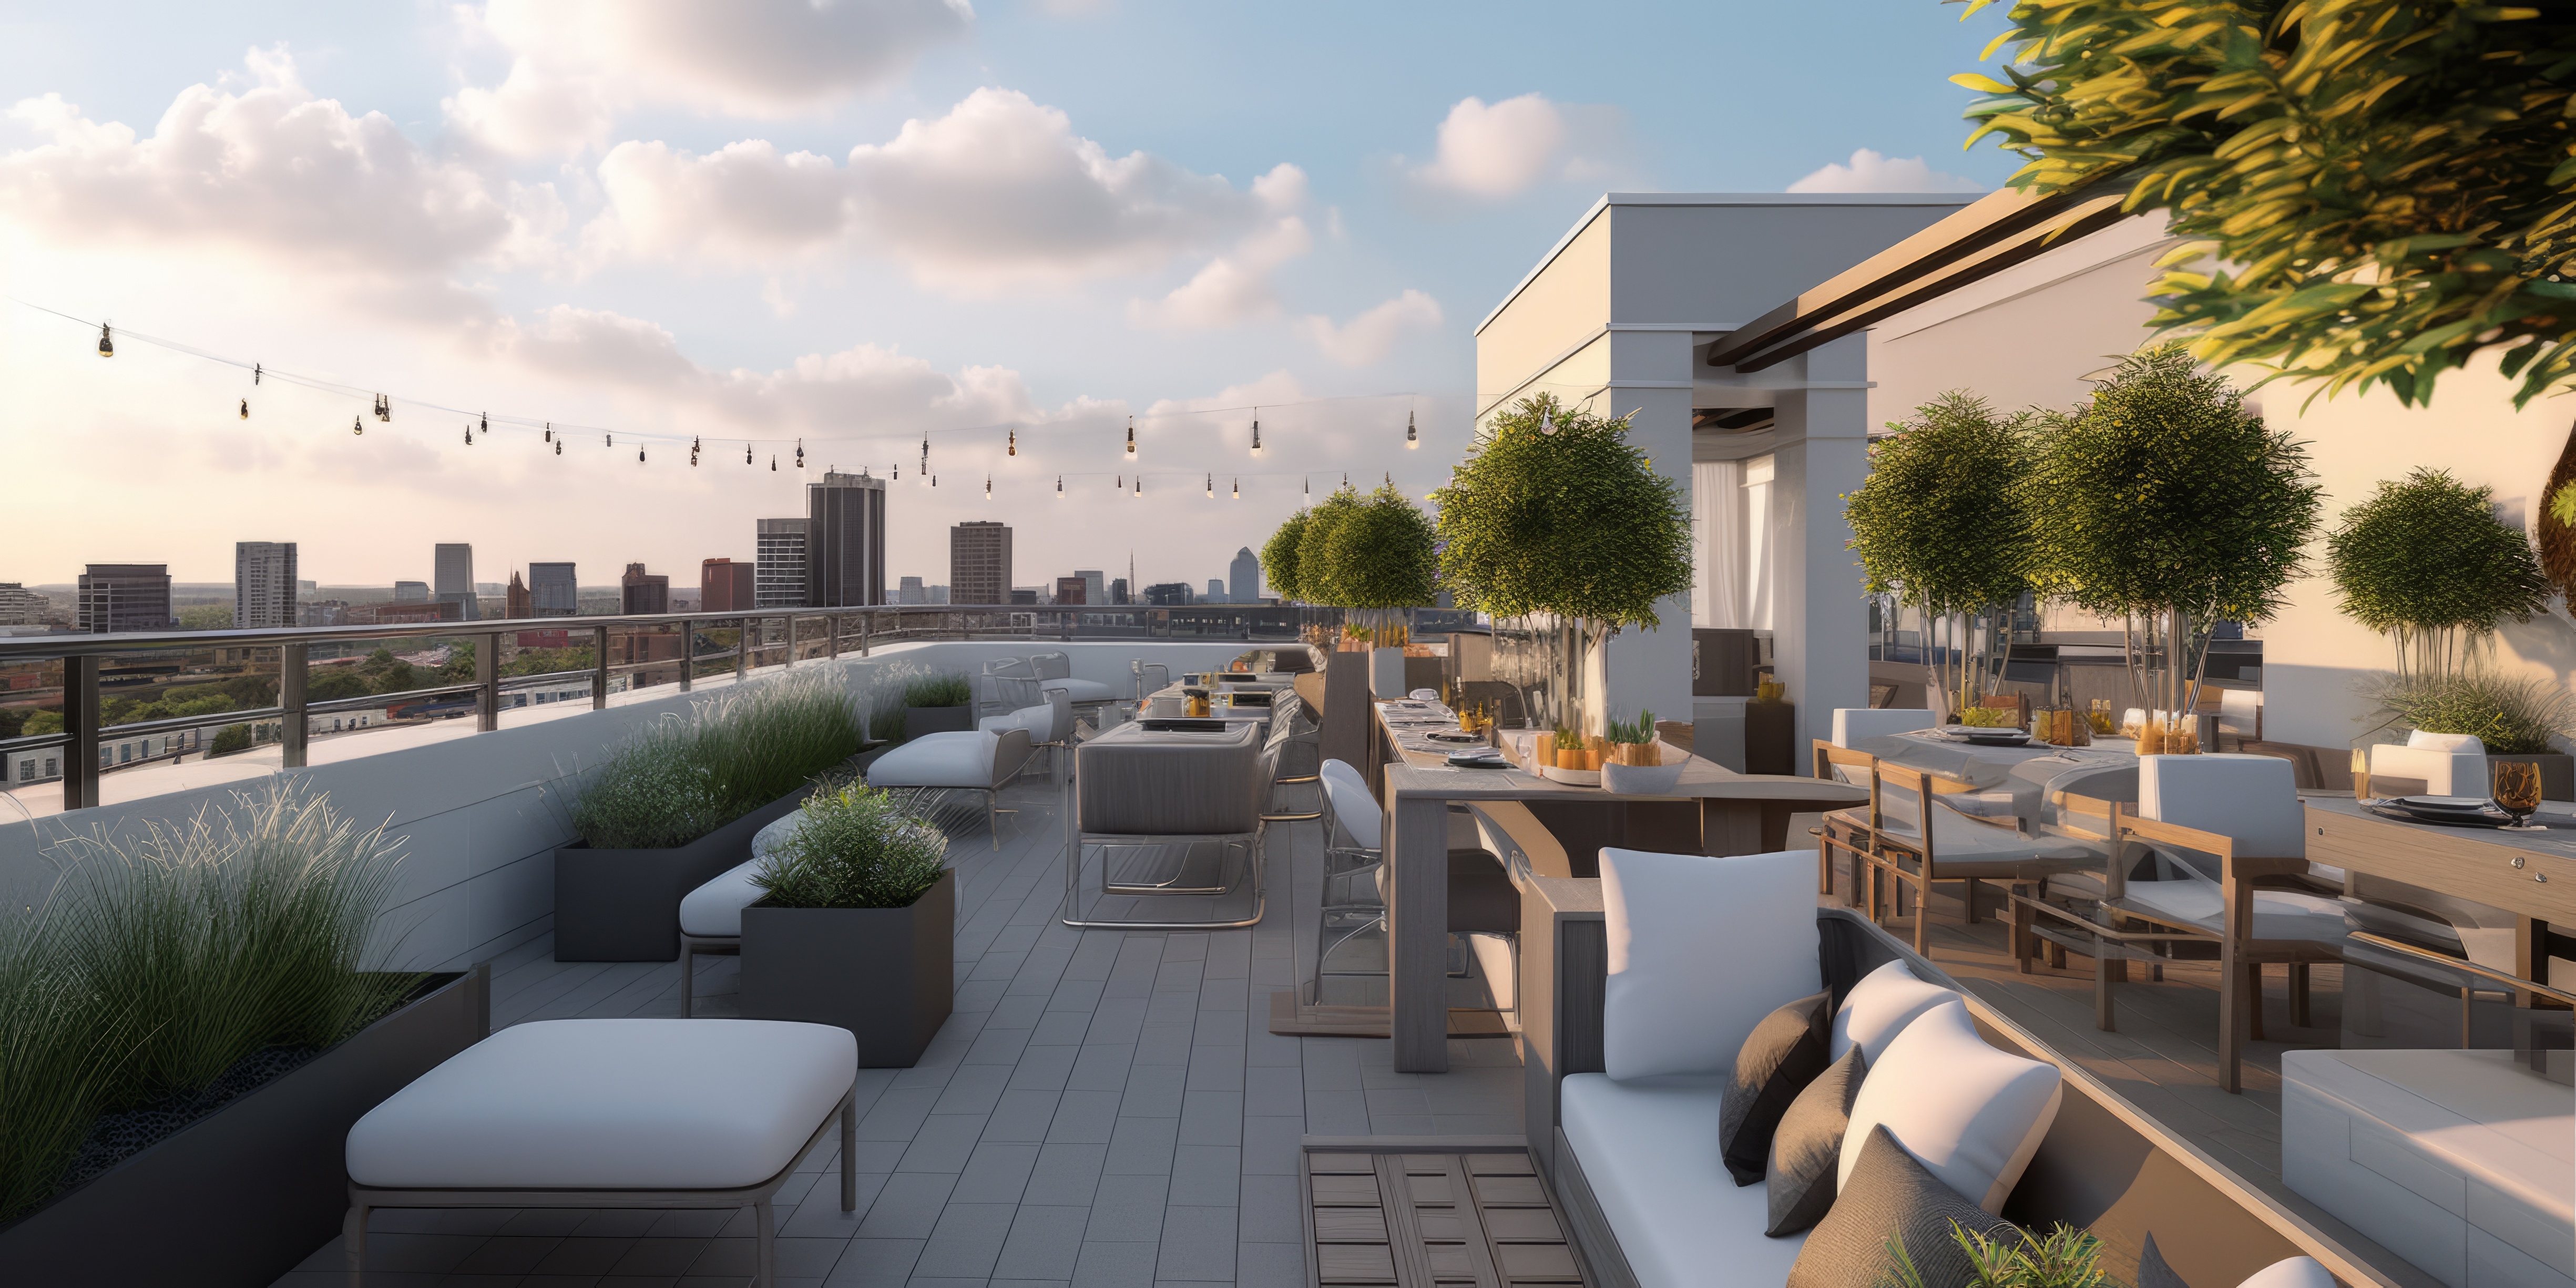 How to develop an office building rooftop space as an employee amenity.